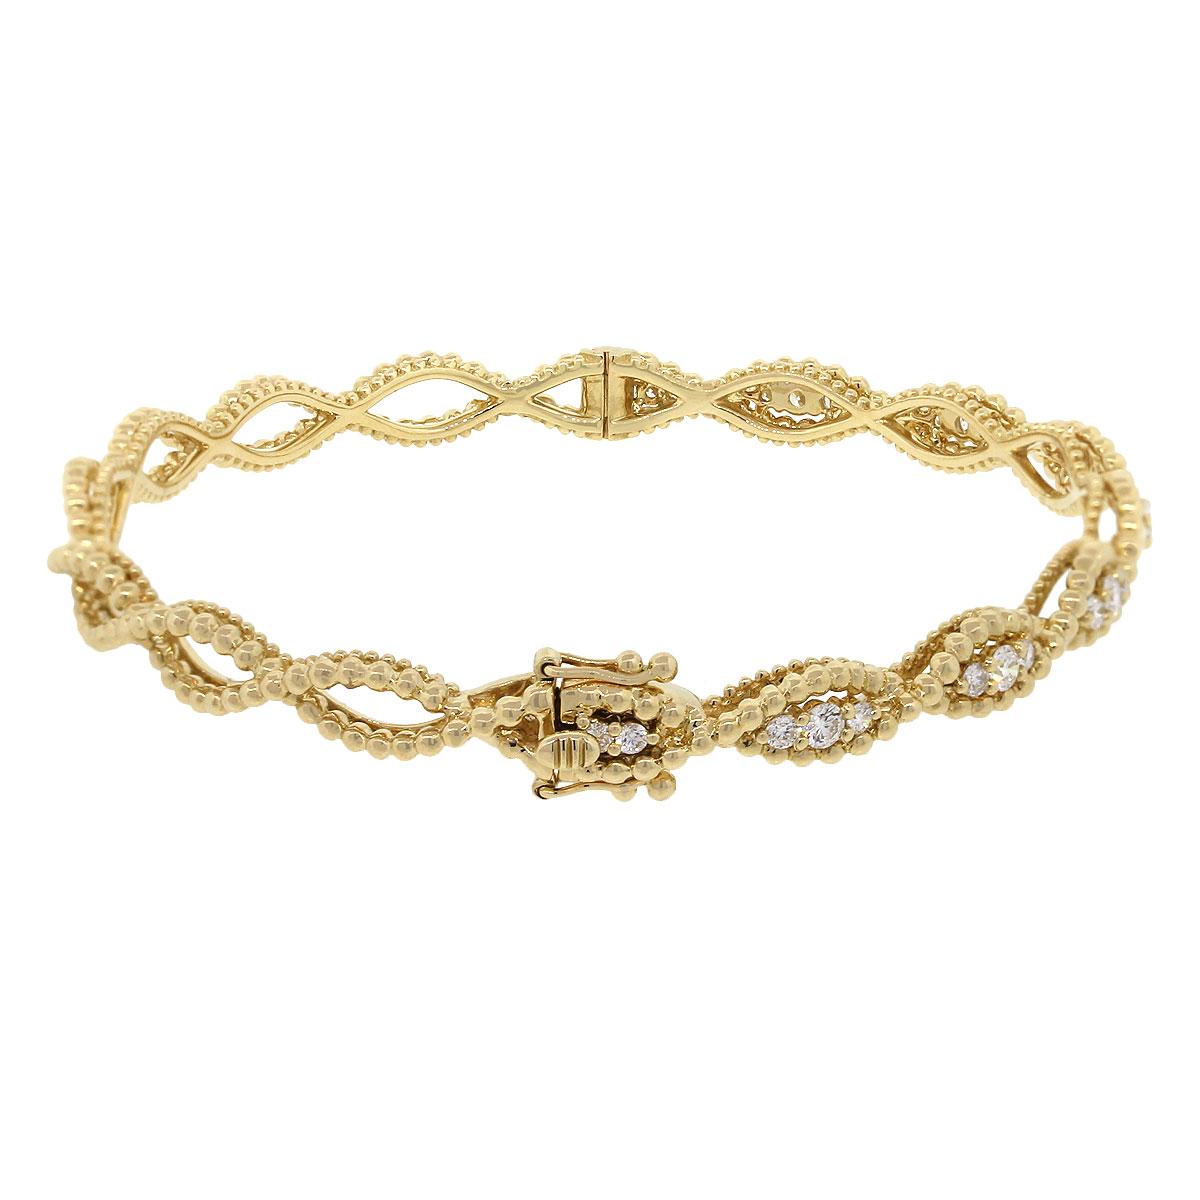 Material: 14k Yellow Gold
Diamond Details: Approximately 0.95ctw of round brilliant diamonds. Diamonds are G/H in color and VS in clarity
Total Weight: 13g (8.3dwt)
Bracelet Measurements: 6.5″ inside circumference
Clasp Details: Box in tongue with